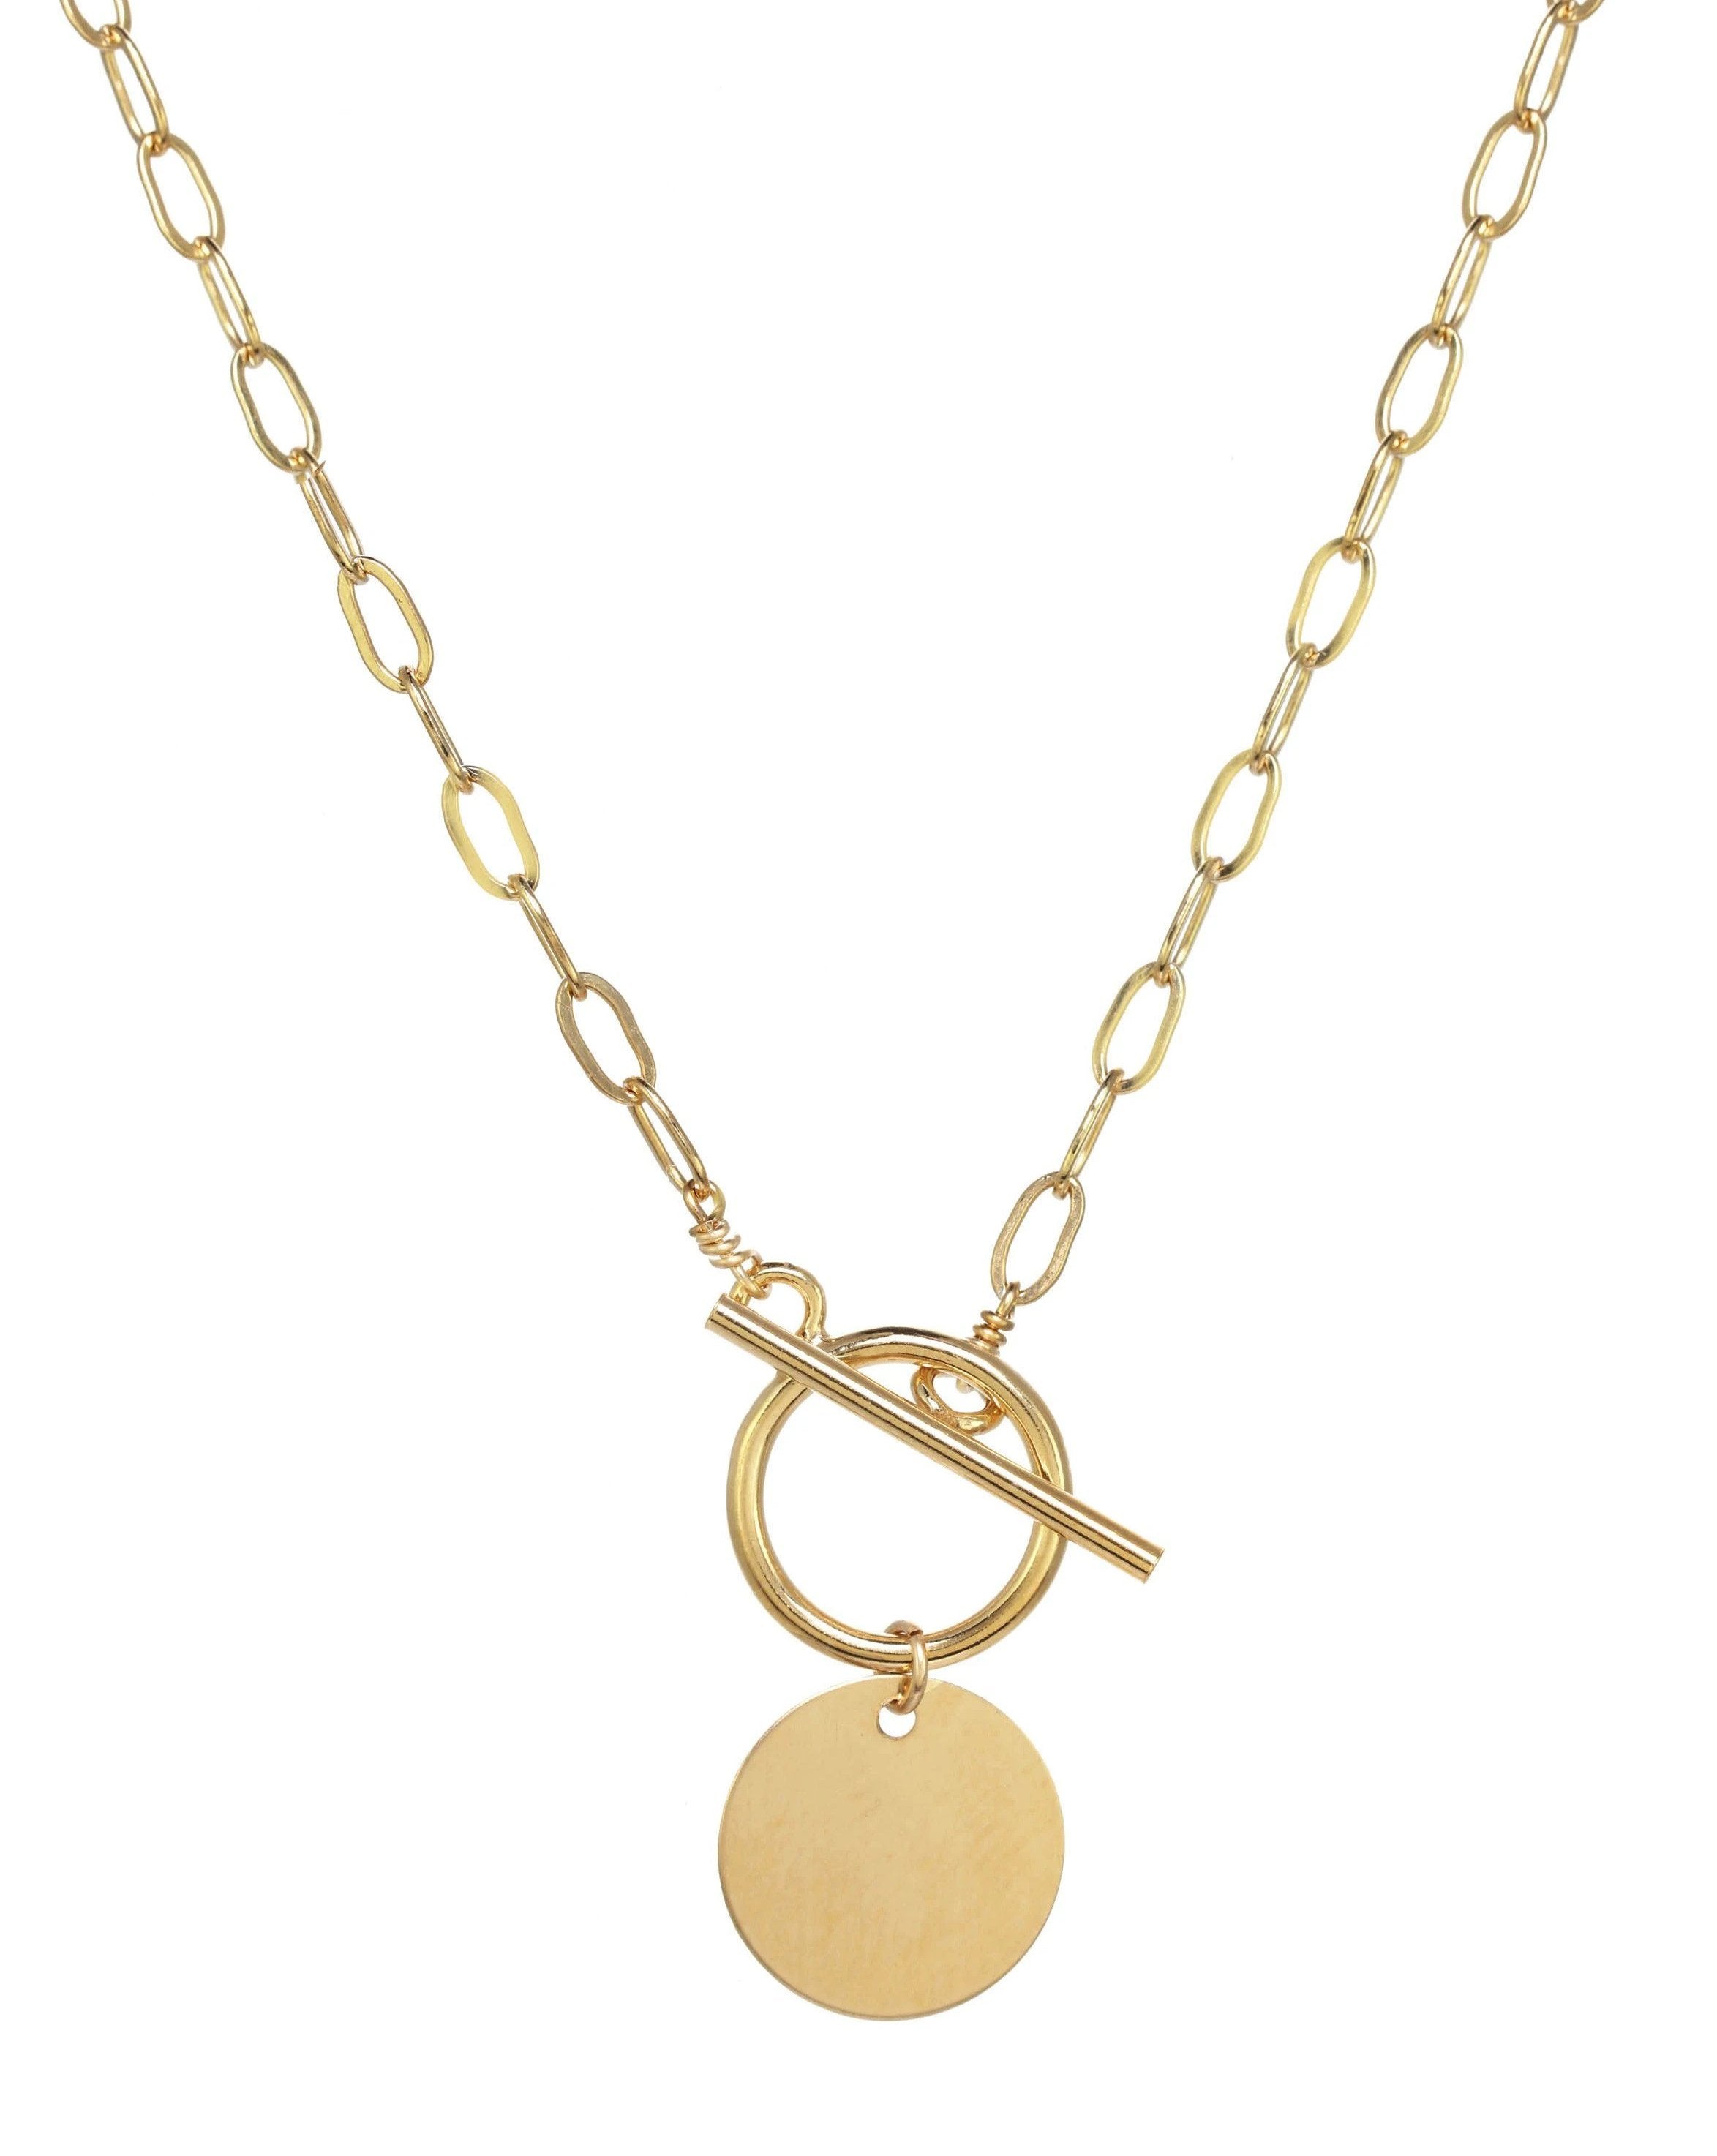 Cappa Necklace by KOZAKH. A 16 to 18 inch adjustable length necklace in 14K Gold Filled, featuring a coin charm.